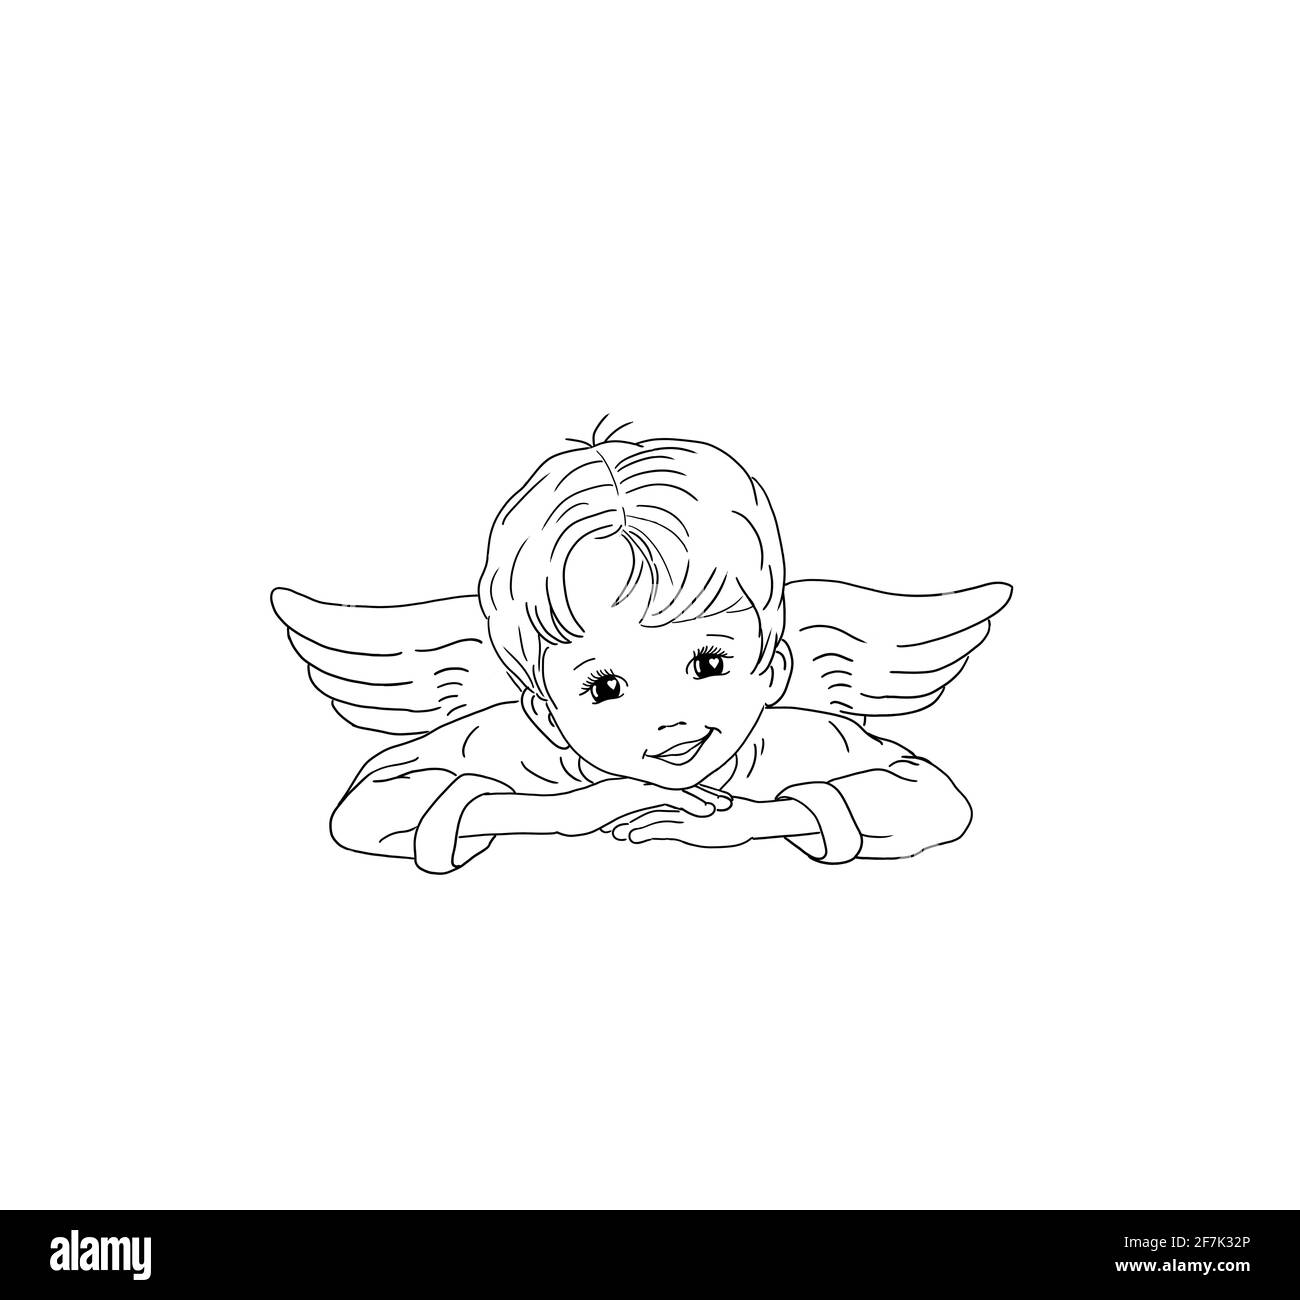 Angel cute sweet child baby boy lies smiling laughing white wings feathers template logo design joy joyful love affection holy companion protector Stock Photo